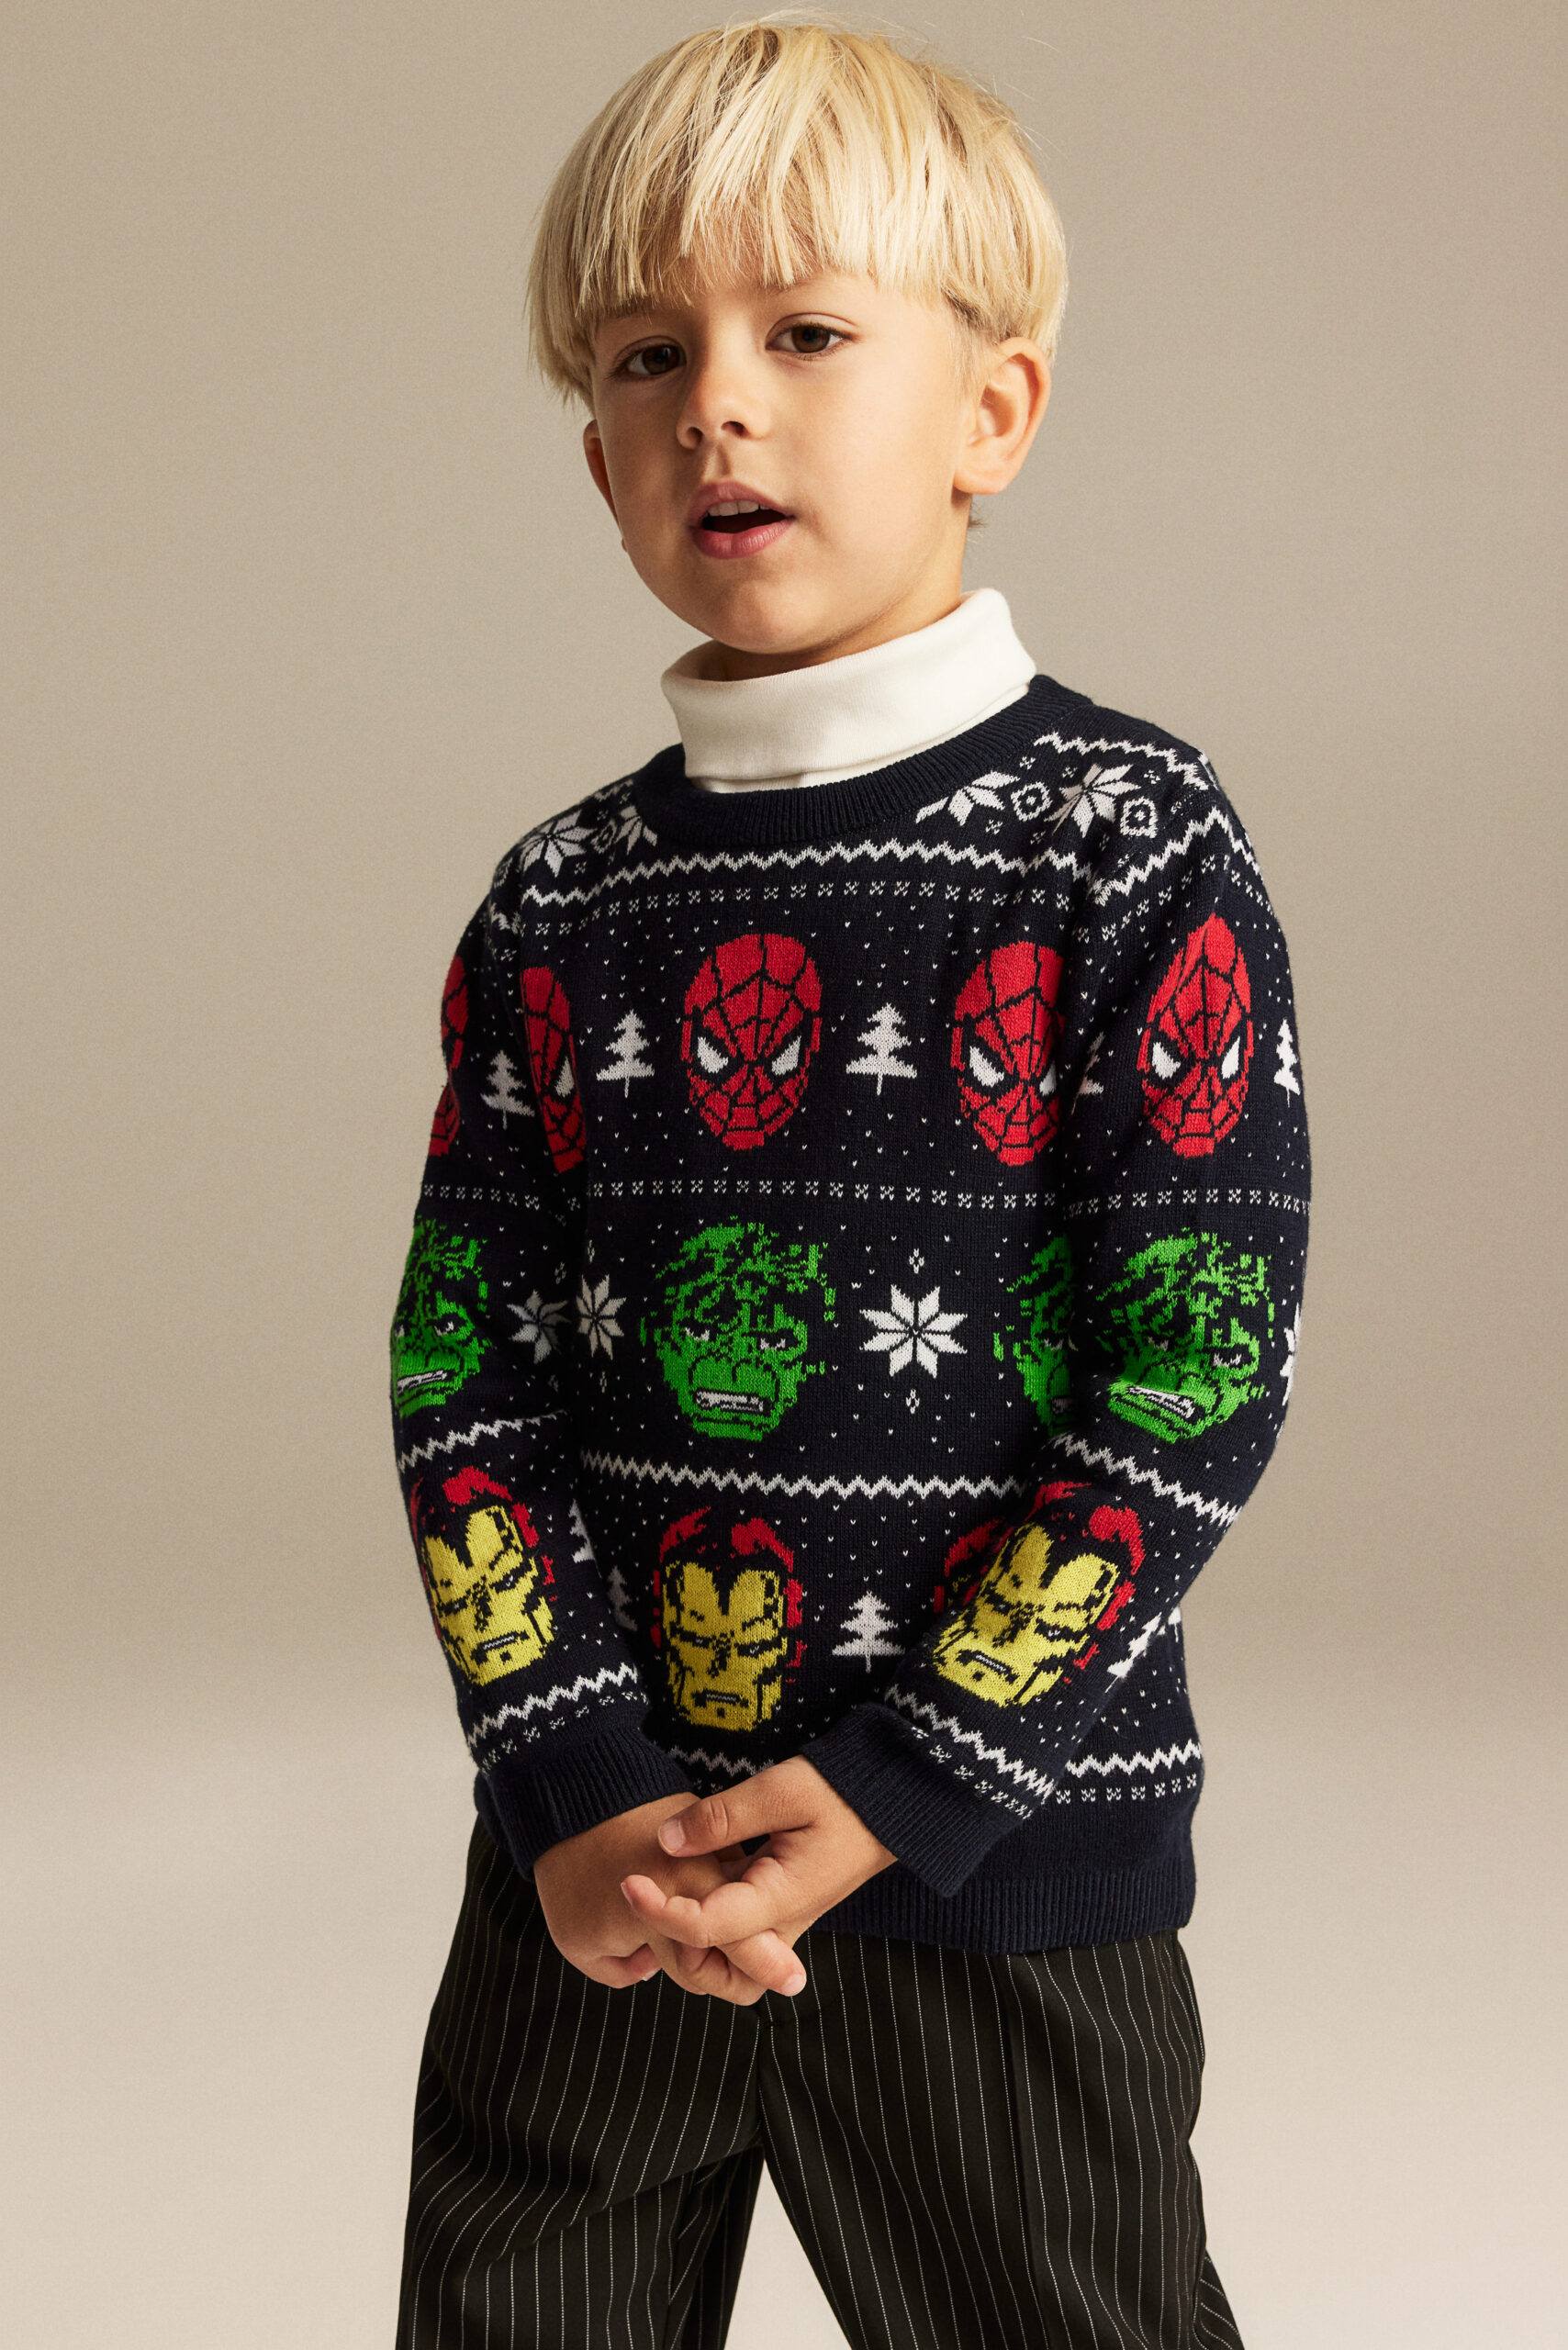 Marvel holiday sweater for boys